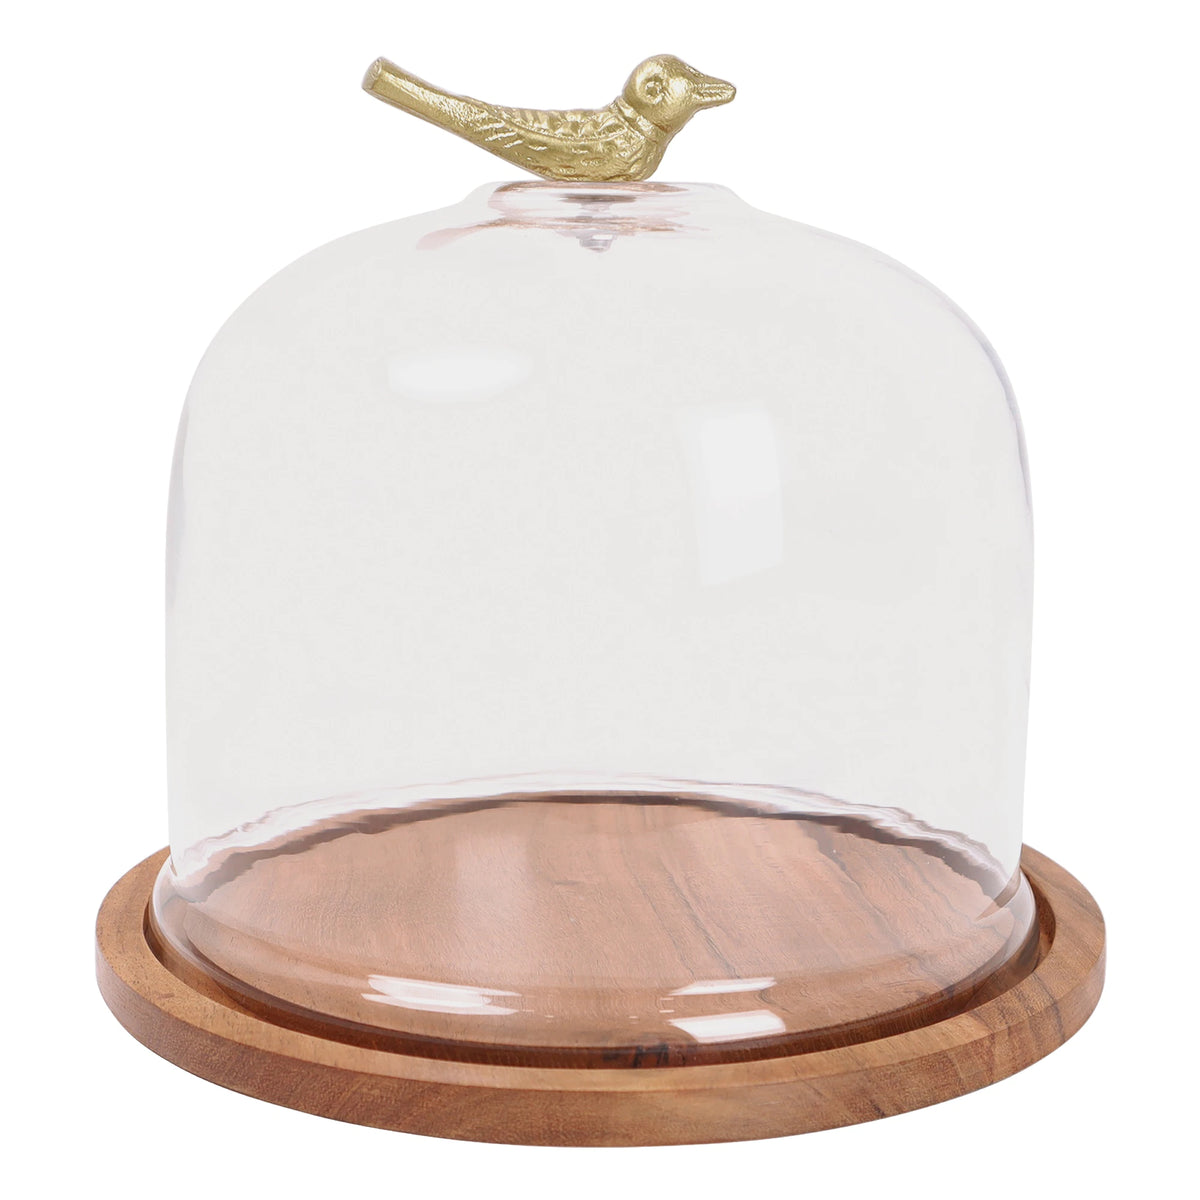 Wooden cake stand with cloche - Bird - 7.25 inch